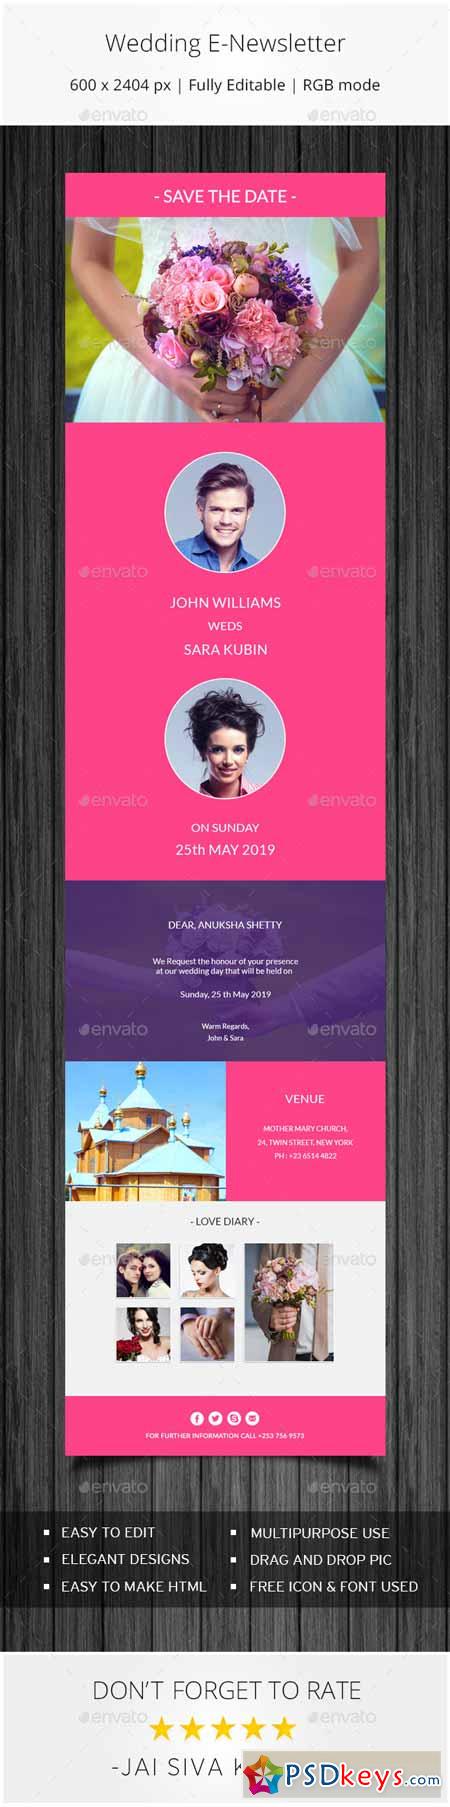 Wedding Invitation Email Template 11062955